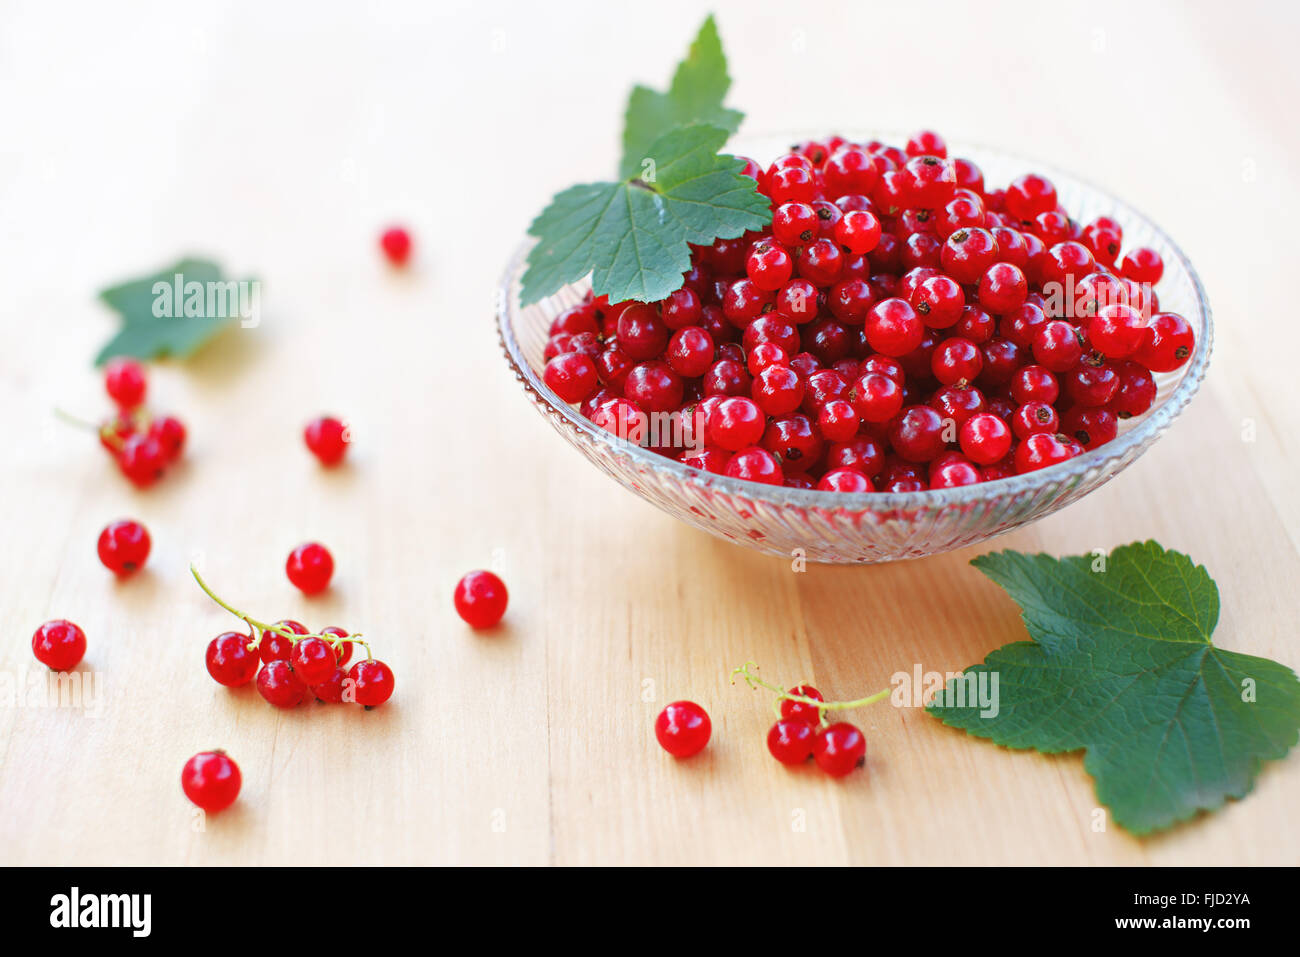 Red currant berries in glass bowl on wood table with green leaves Stock Photo